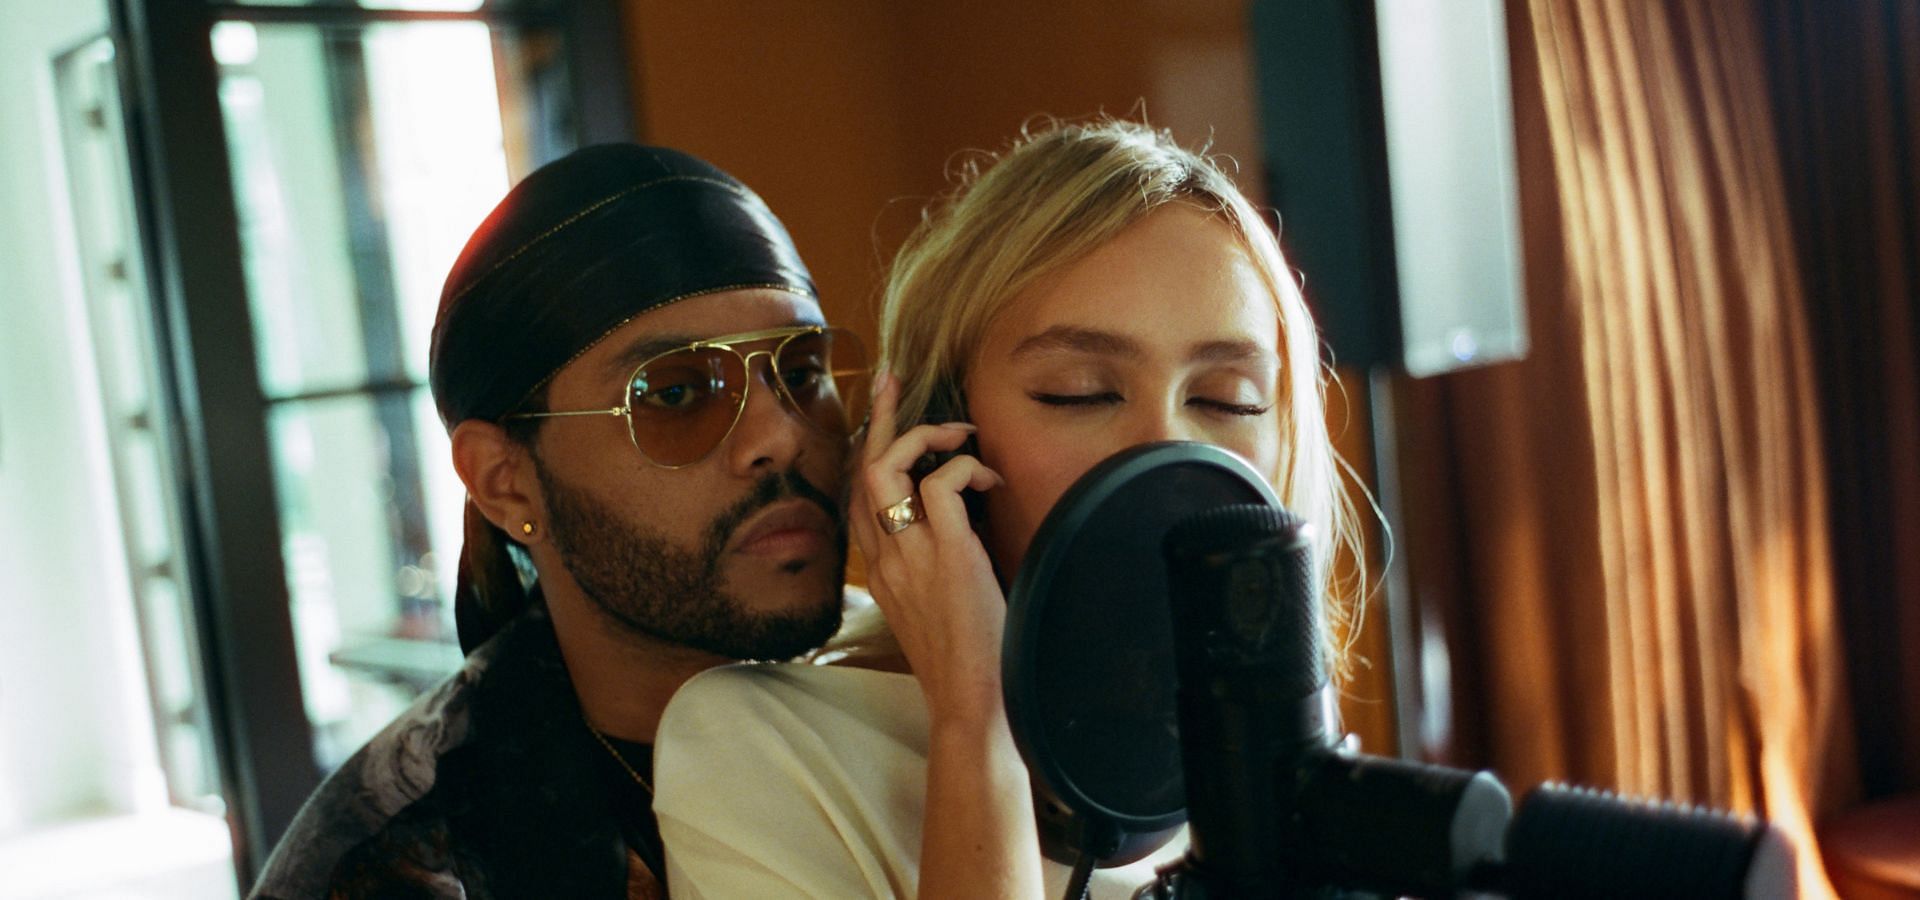 The Weeknd and Lily-Rose Depp for The Idol (Image via Twitter/@HBO)